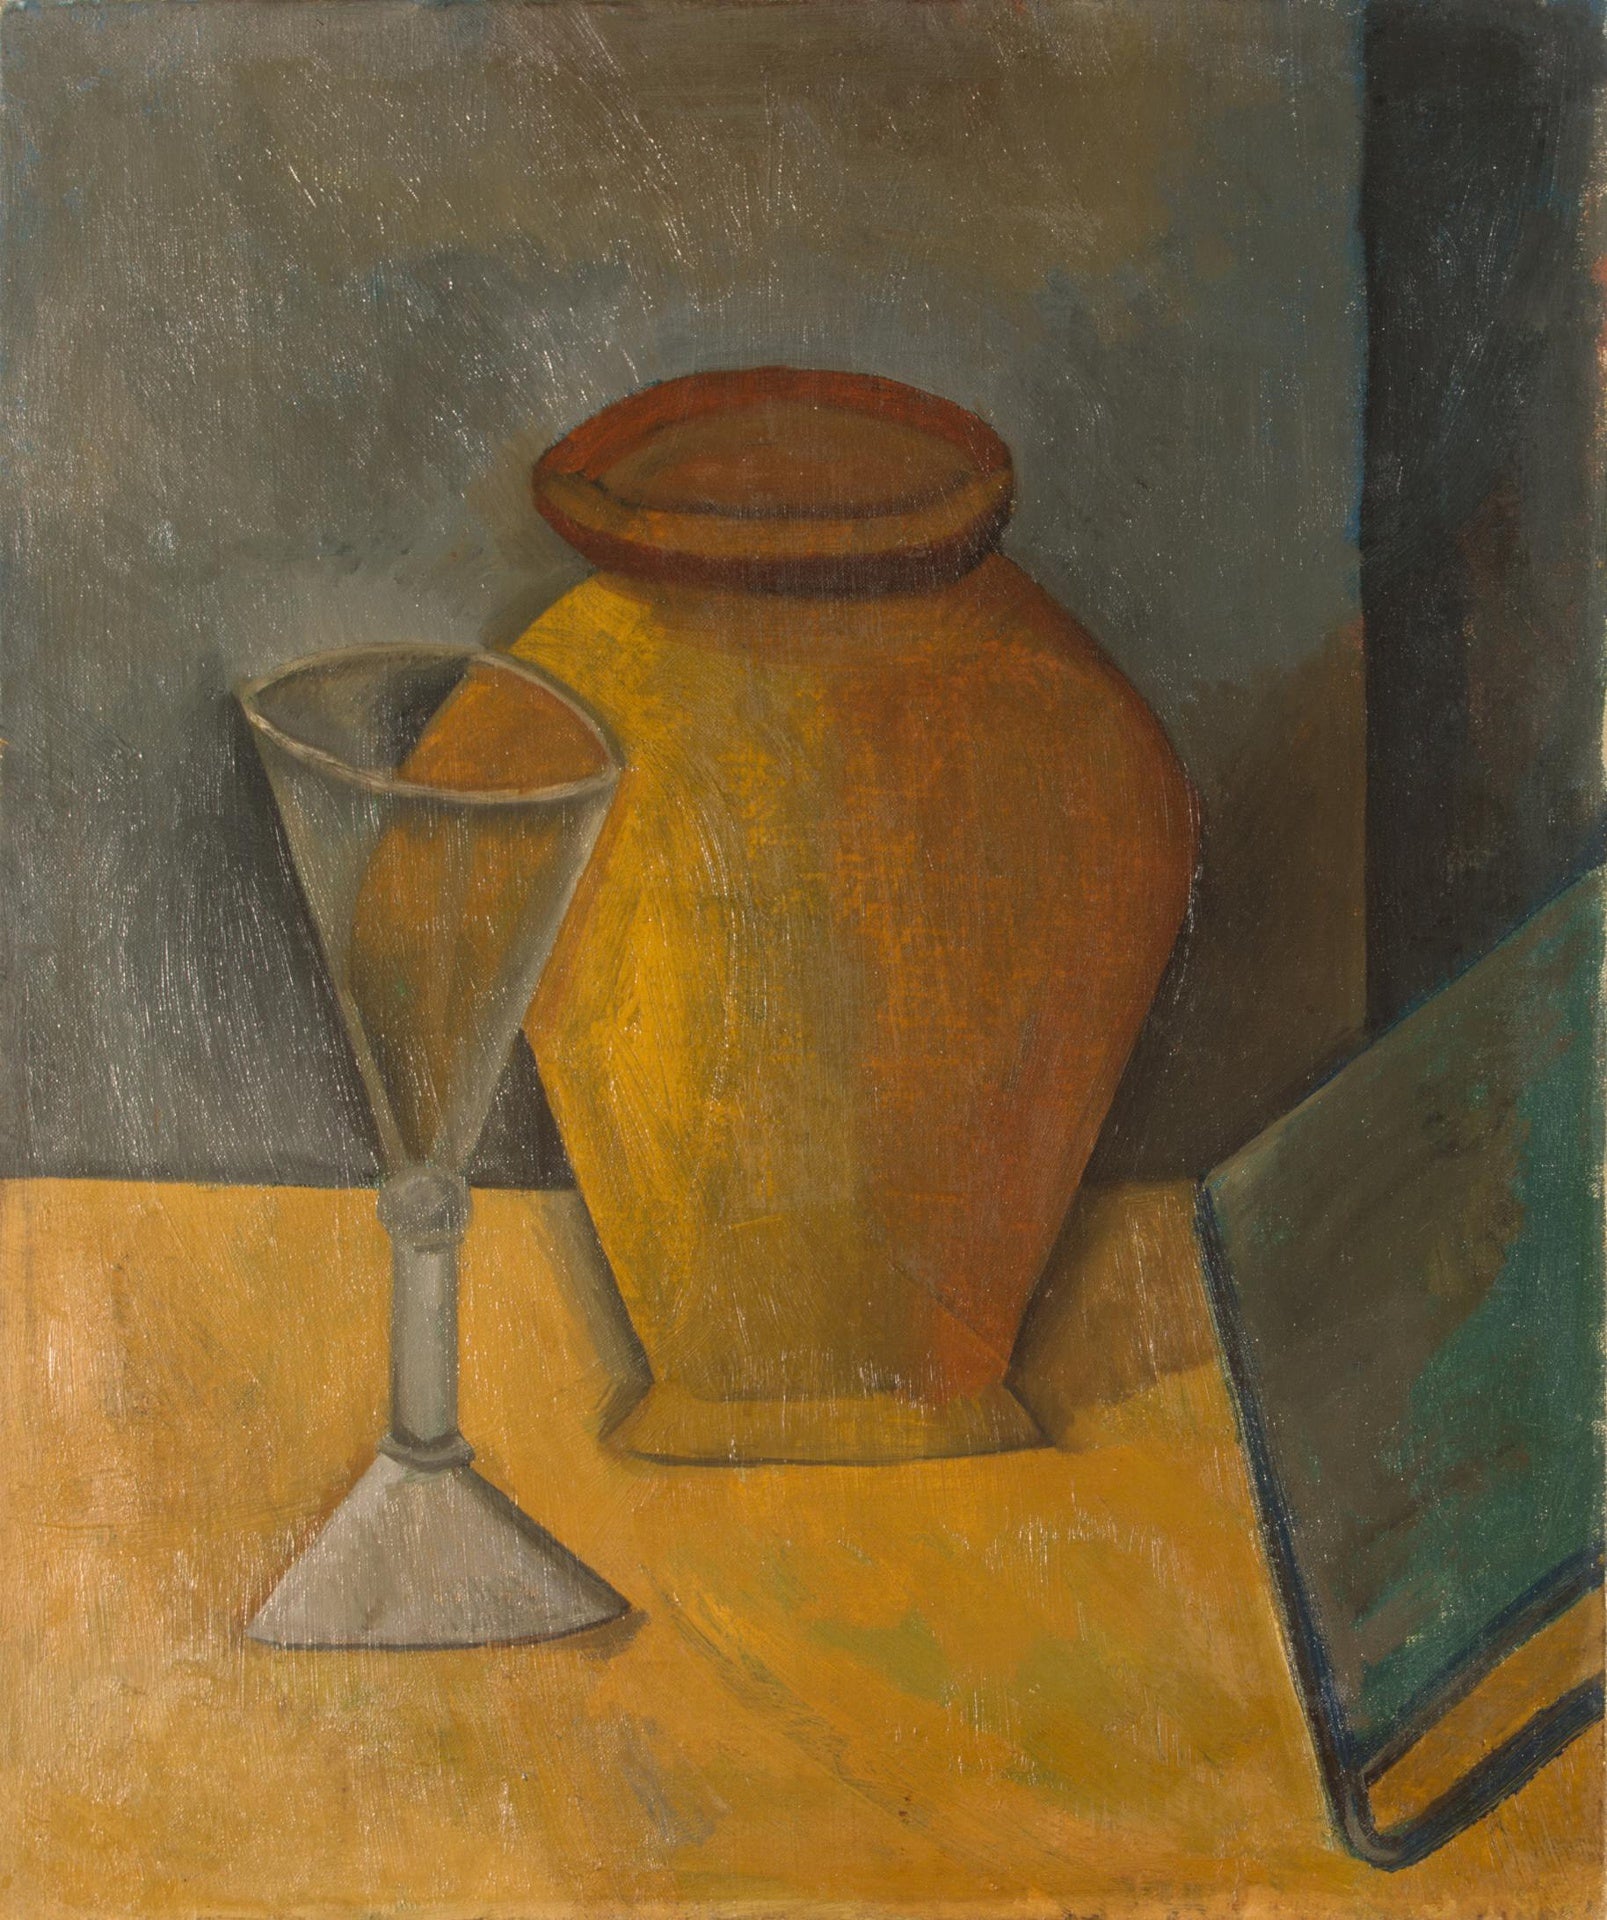 Pot, Glass, and Book (1908) by Pablo Picasso - 17" x 22" Fine Art Print